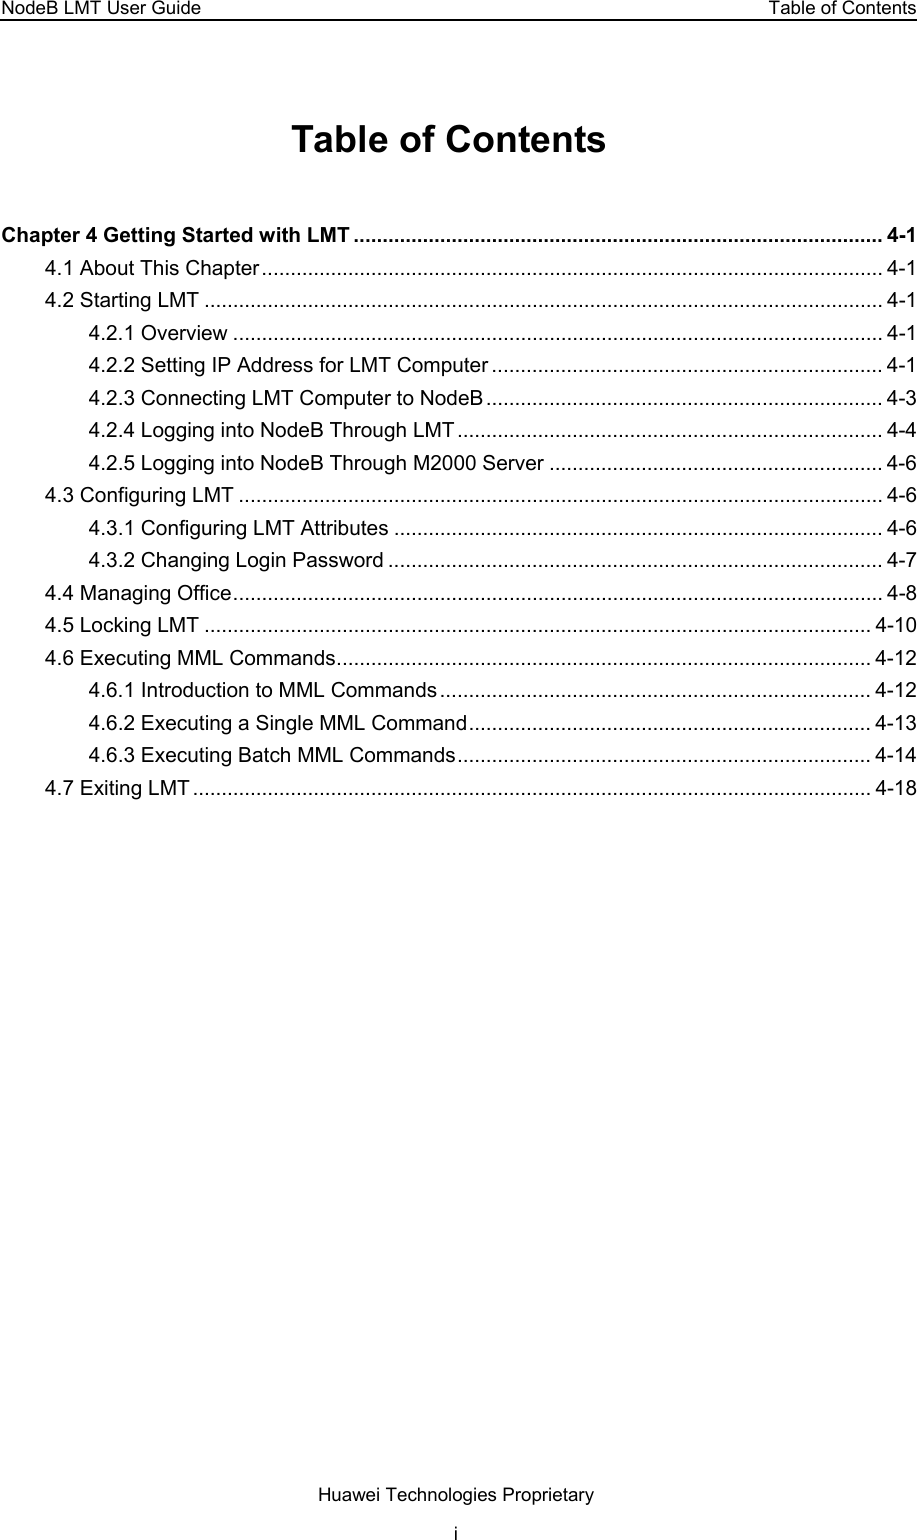 NodeB LMT User Guide  Table of Contents Table of Contents Chapter 4 Getting Started with LMT ............................................................................................ 4-1 4.1 About This Chapter............................................................................................................ 4-1 4.2 Starting LMT ...................................................................................................................... 4-1 4.2.1 Overview ................................................................................................................. 4-1 4.2.2 Setting IP Address for LMT Computer .................................................................... 4-1 4.2.3 Connecting LMT Computer to NodeB..................................................................... 4-3 4.2.4 Logging into NodeB Through LMT.......................................................................... 4-4 4.2.5 Logging into NodeB Through M2000 Server .......................................................... 4-6 4.3 Configuring LMT ................................................................................................................ 4-6 4.3.1 Configuring LMT Attributes ..................................................................................... 4-6 4.3.2 Changing Login Password ...................................................................................... 4-7 4.4 Managing Office................................................................................................................. 4-8 4.5 Locking LMT .................................................................................................................... 4-10 4.6 Executing MML Commands............................................................................................. 4-12 4.6.1 Introduction to MML Commands........................................................................... 4-12 4.6.2 Executing a Single MML Command...................................................................... 4-13 4.6.3 Executing Batch MML Commands........................................................................ 4-14 4.7 Exiting LMT ...................................................................................................................... 4-18 Huawei Technologies Proprietary i 